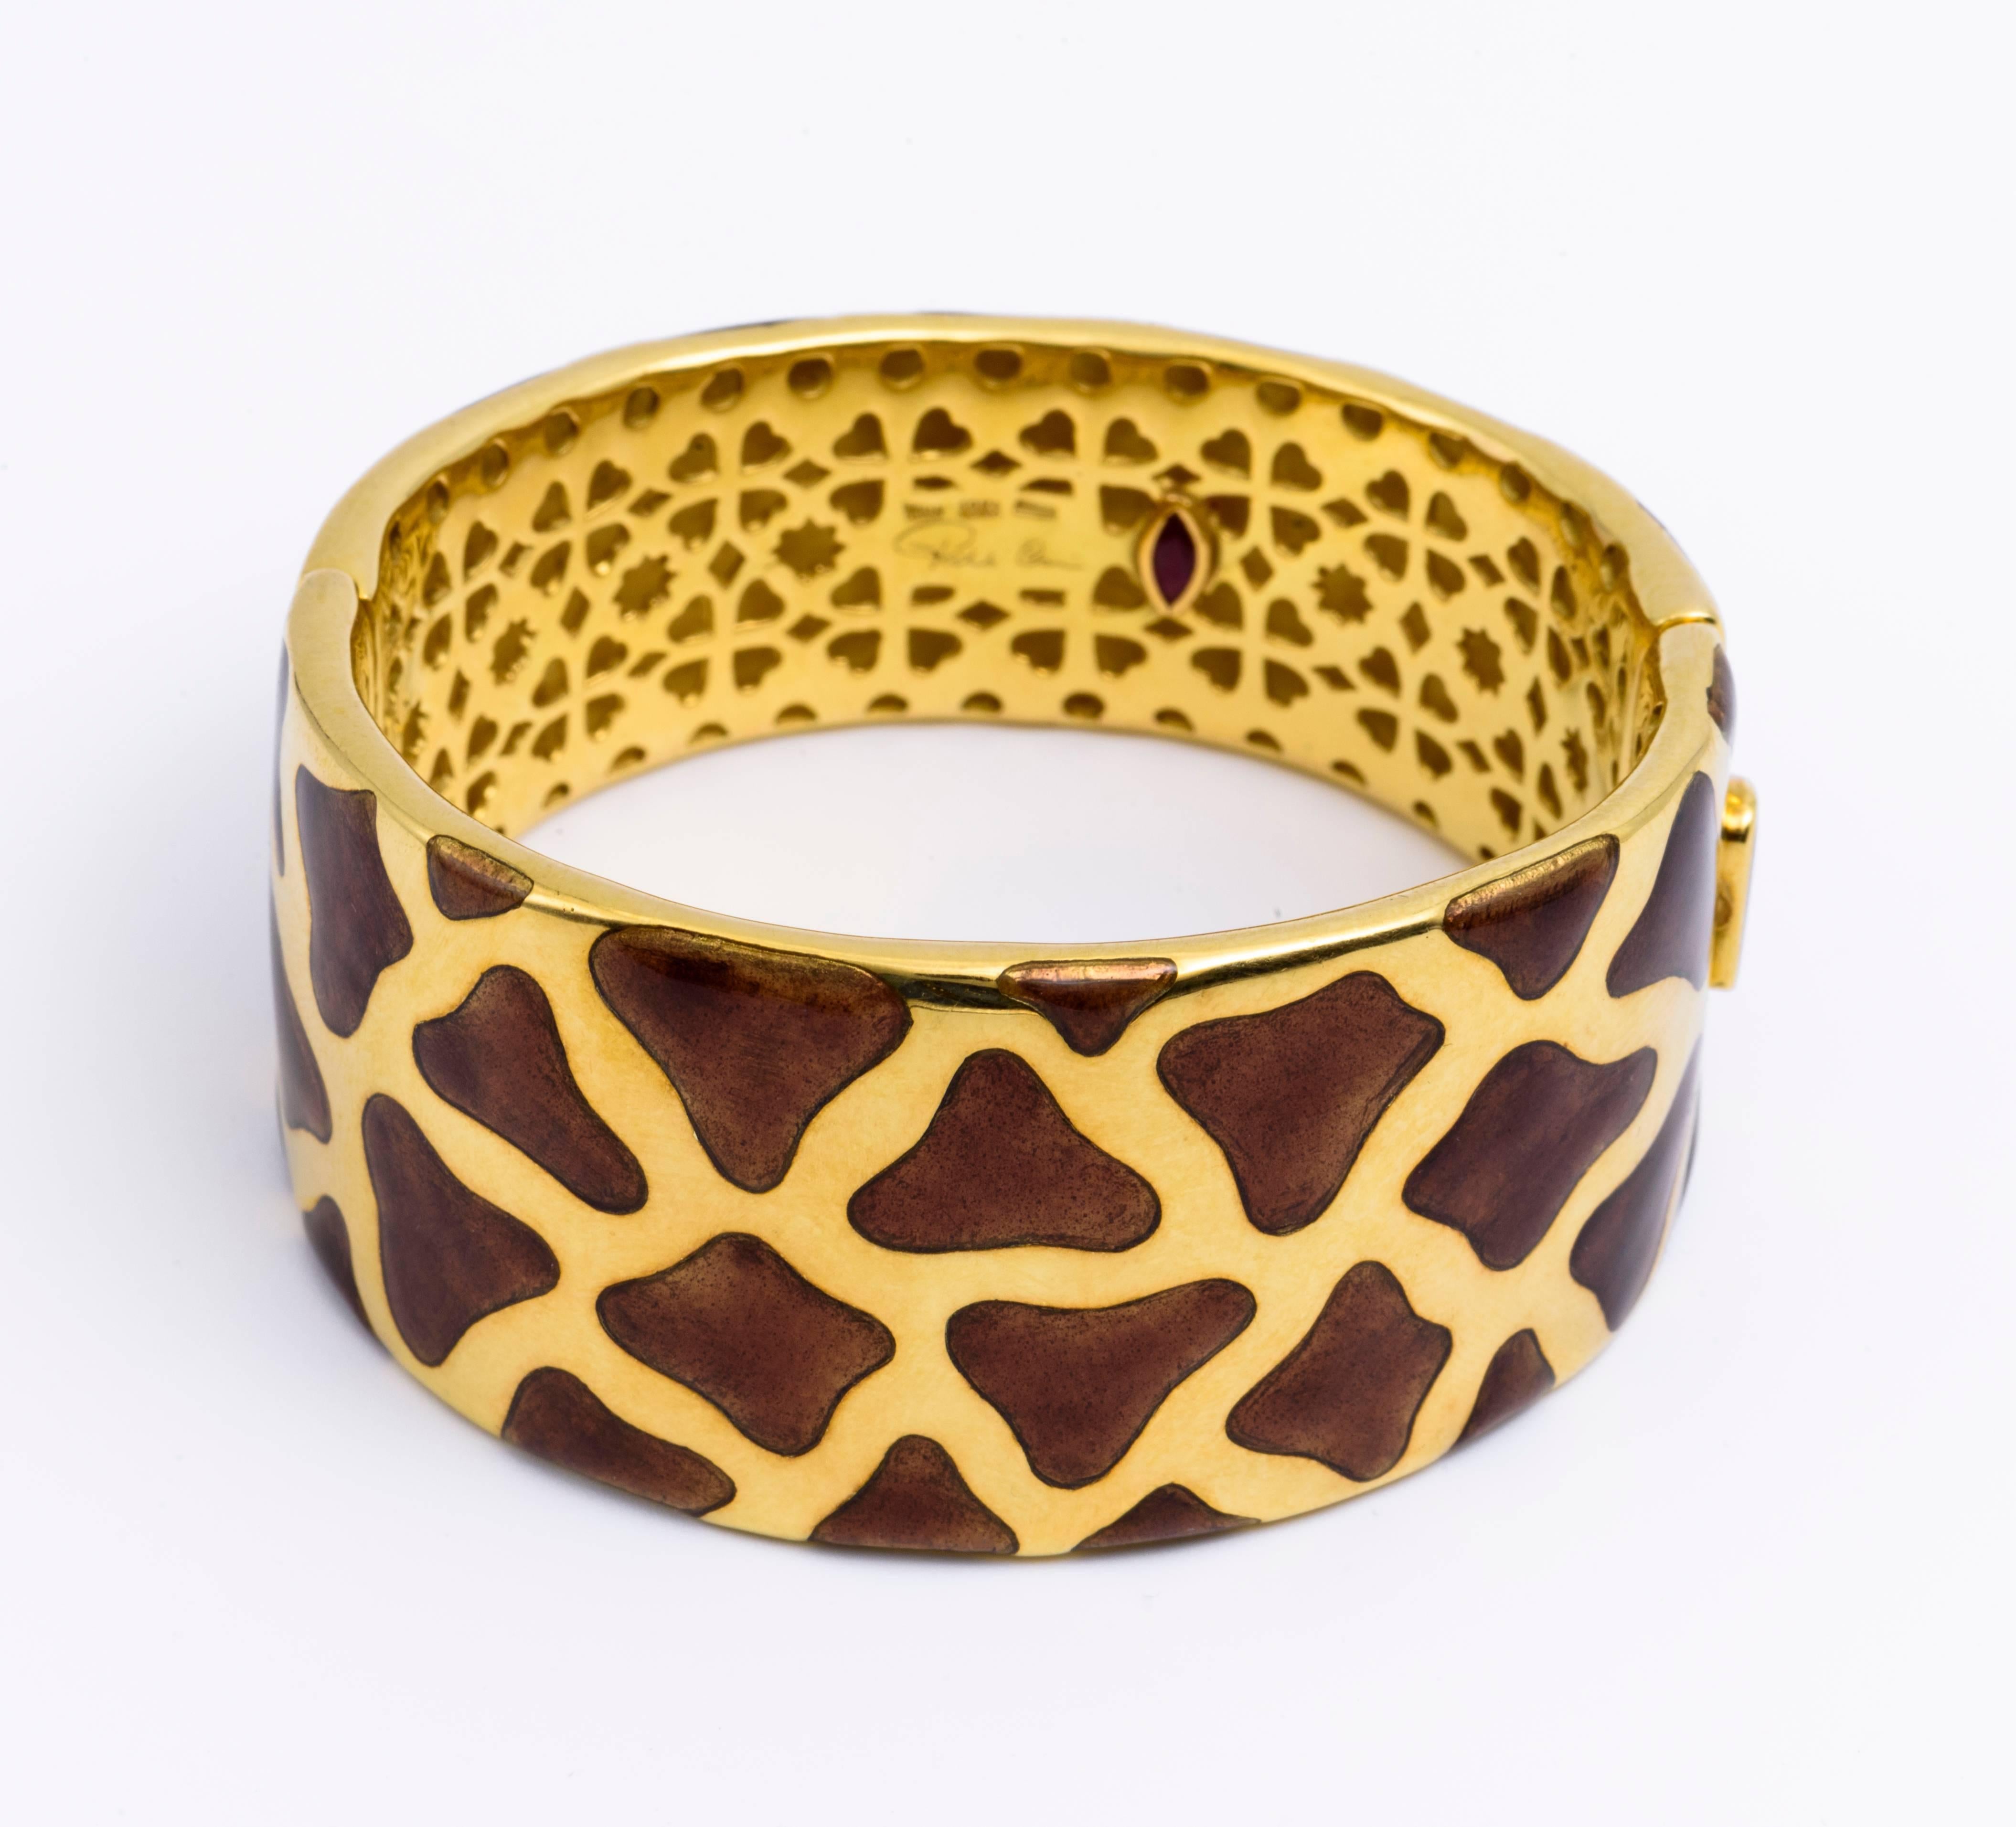 Brown and Yellow Gold Bangle designed in animal print with intricate details on back. 
Roberto Coin played upon the fashionable style of animal-print : the Panda! This bracelet is made of 18K yellow gold with a yellow gold interior accented with a